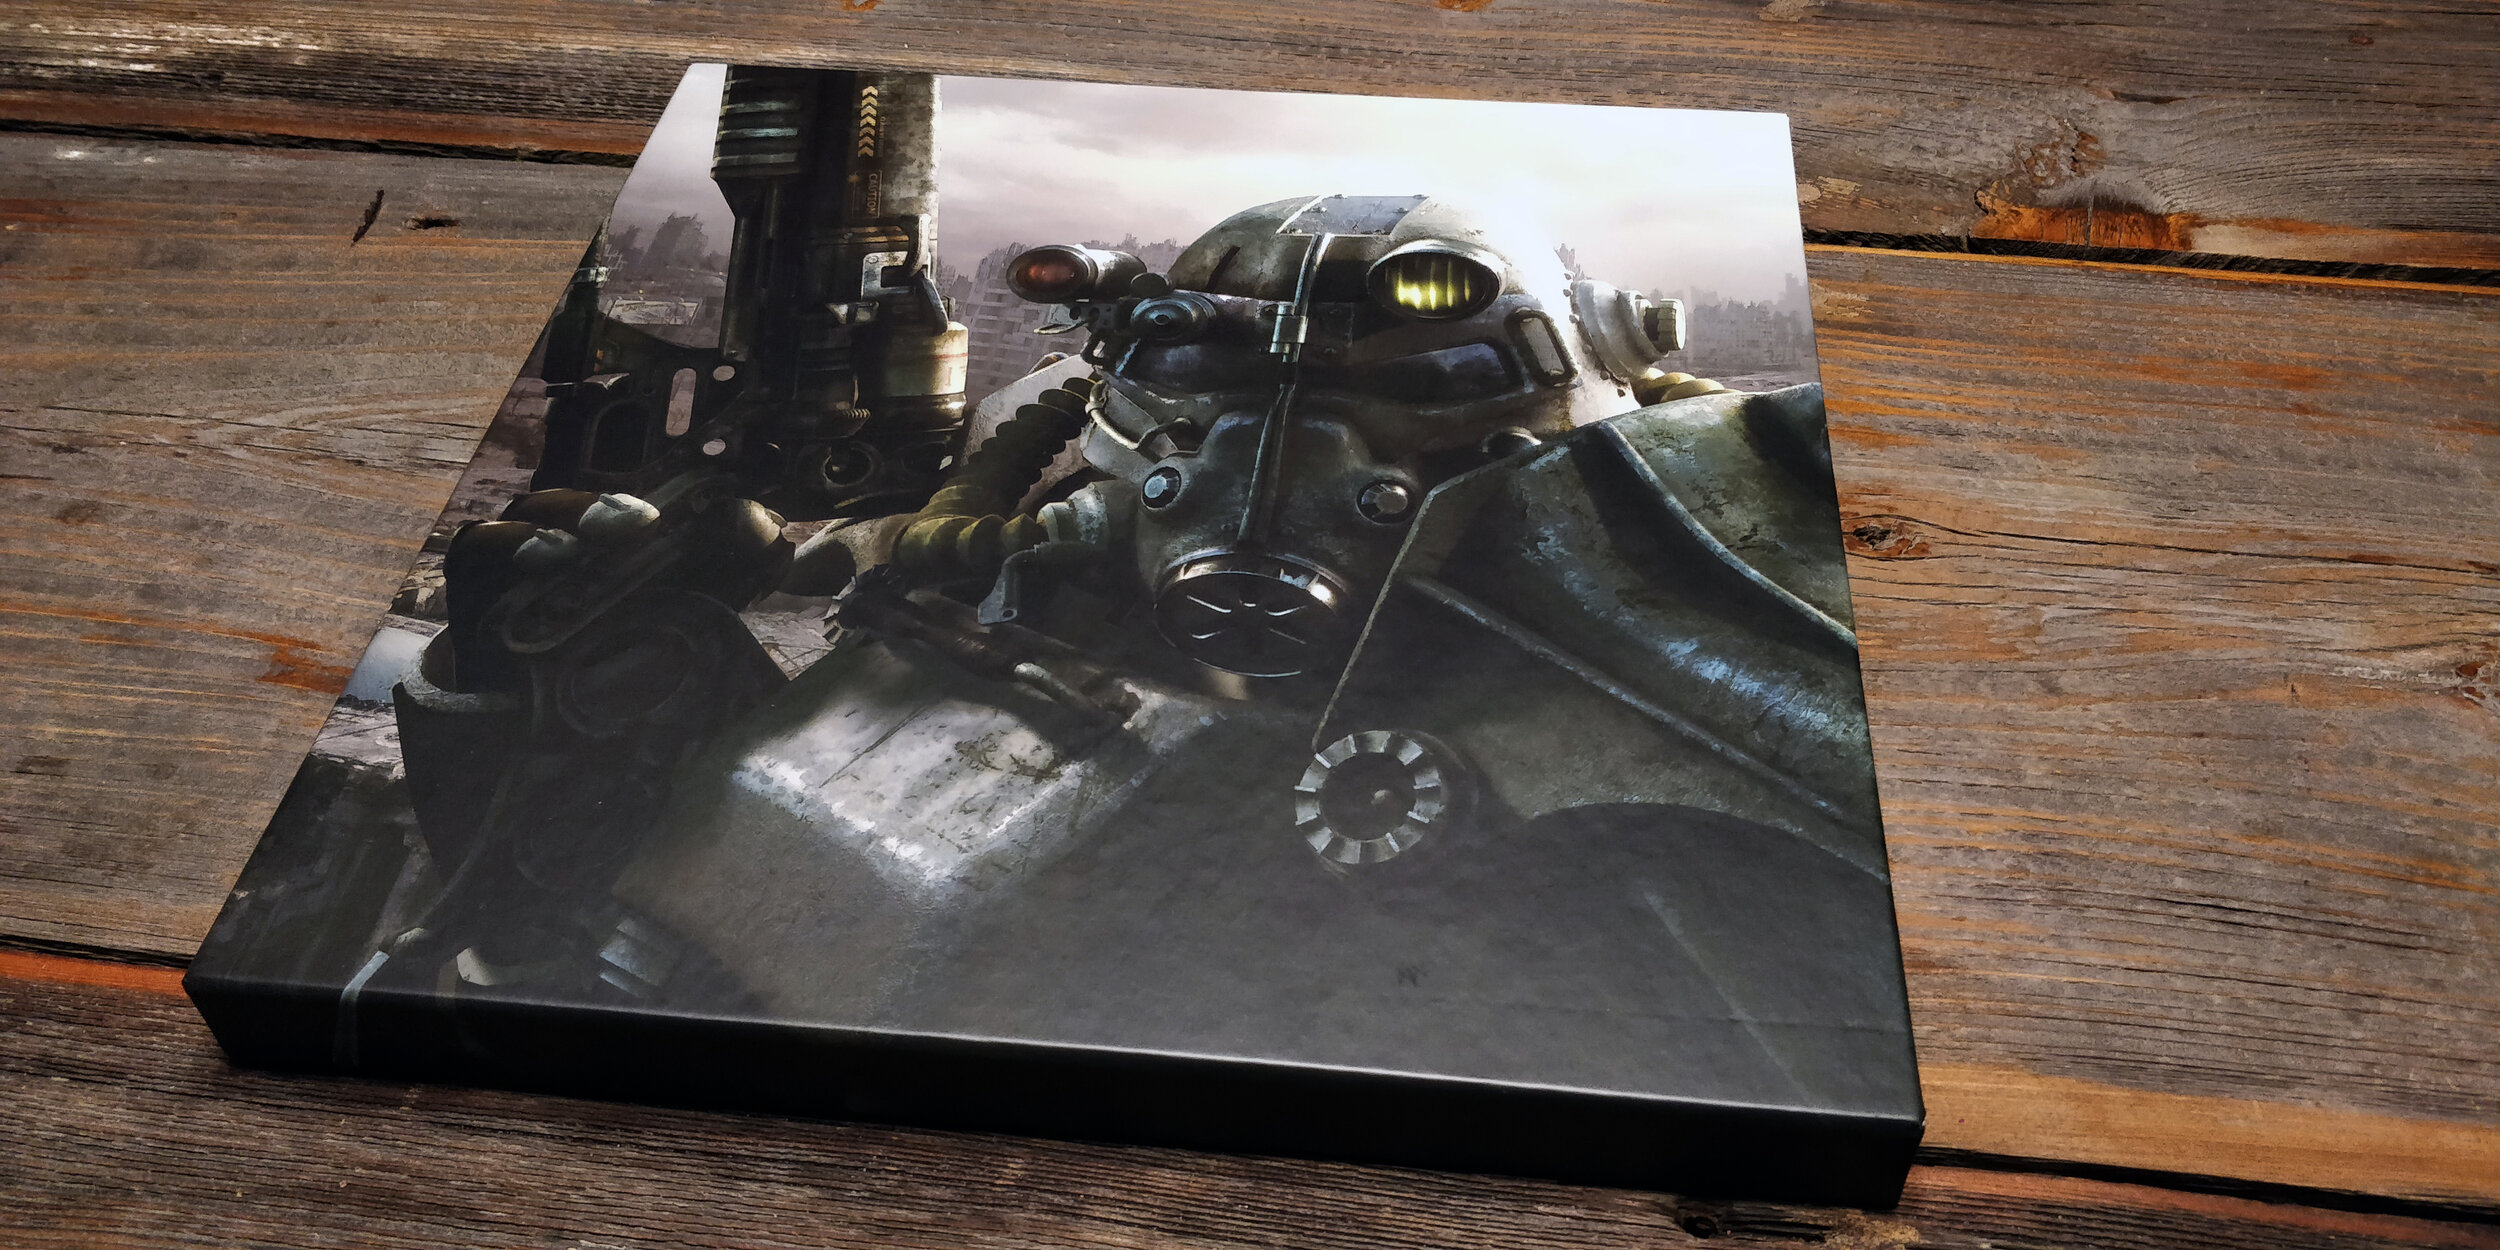 JUST ANNOUNCED] The Galaxy News Radio tracks vinyl from Fallout 3 will be  available for purchase as a standalone record on regular black vinyl,  without the entire box set. Just announced via